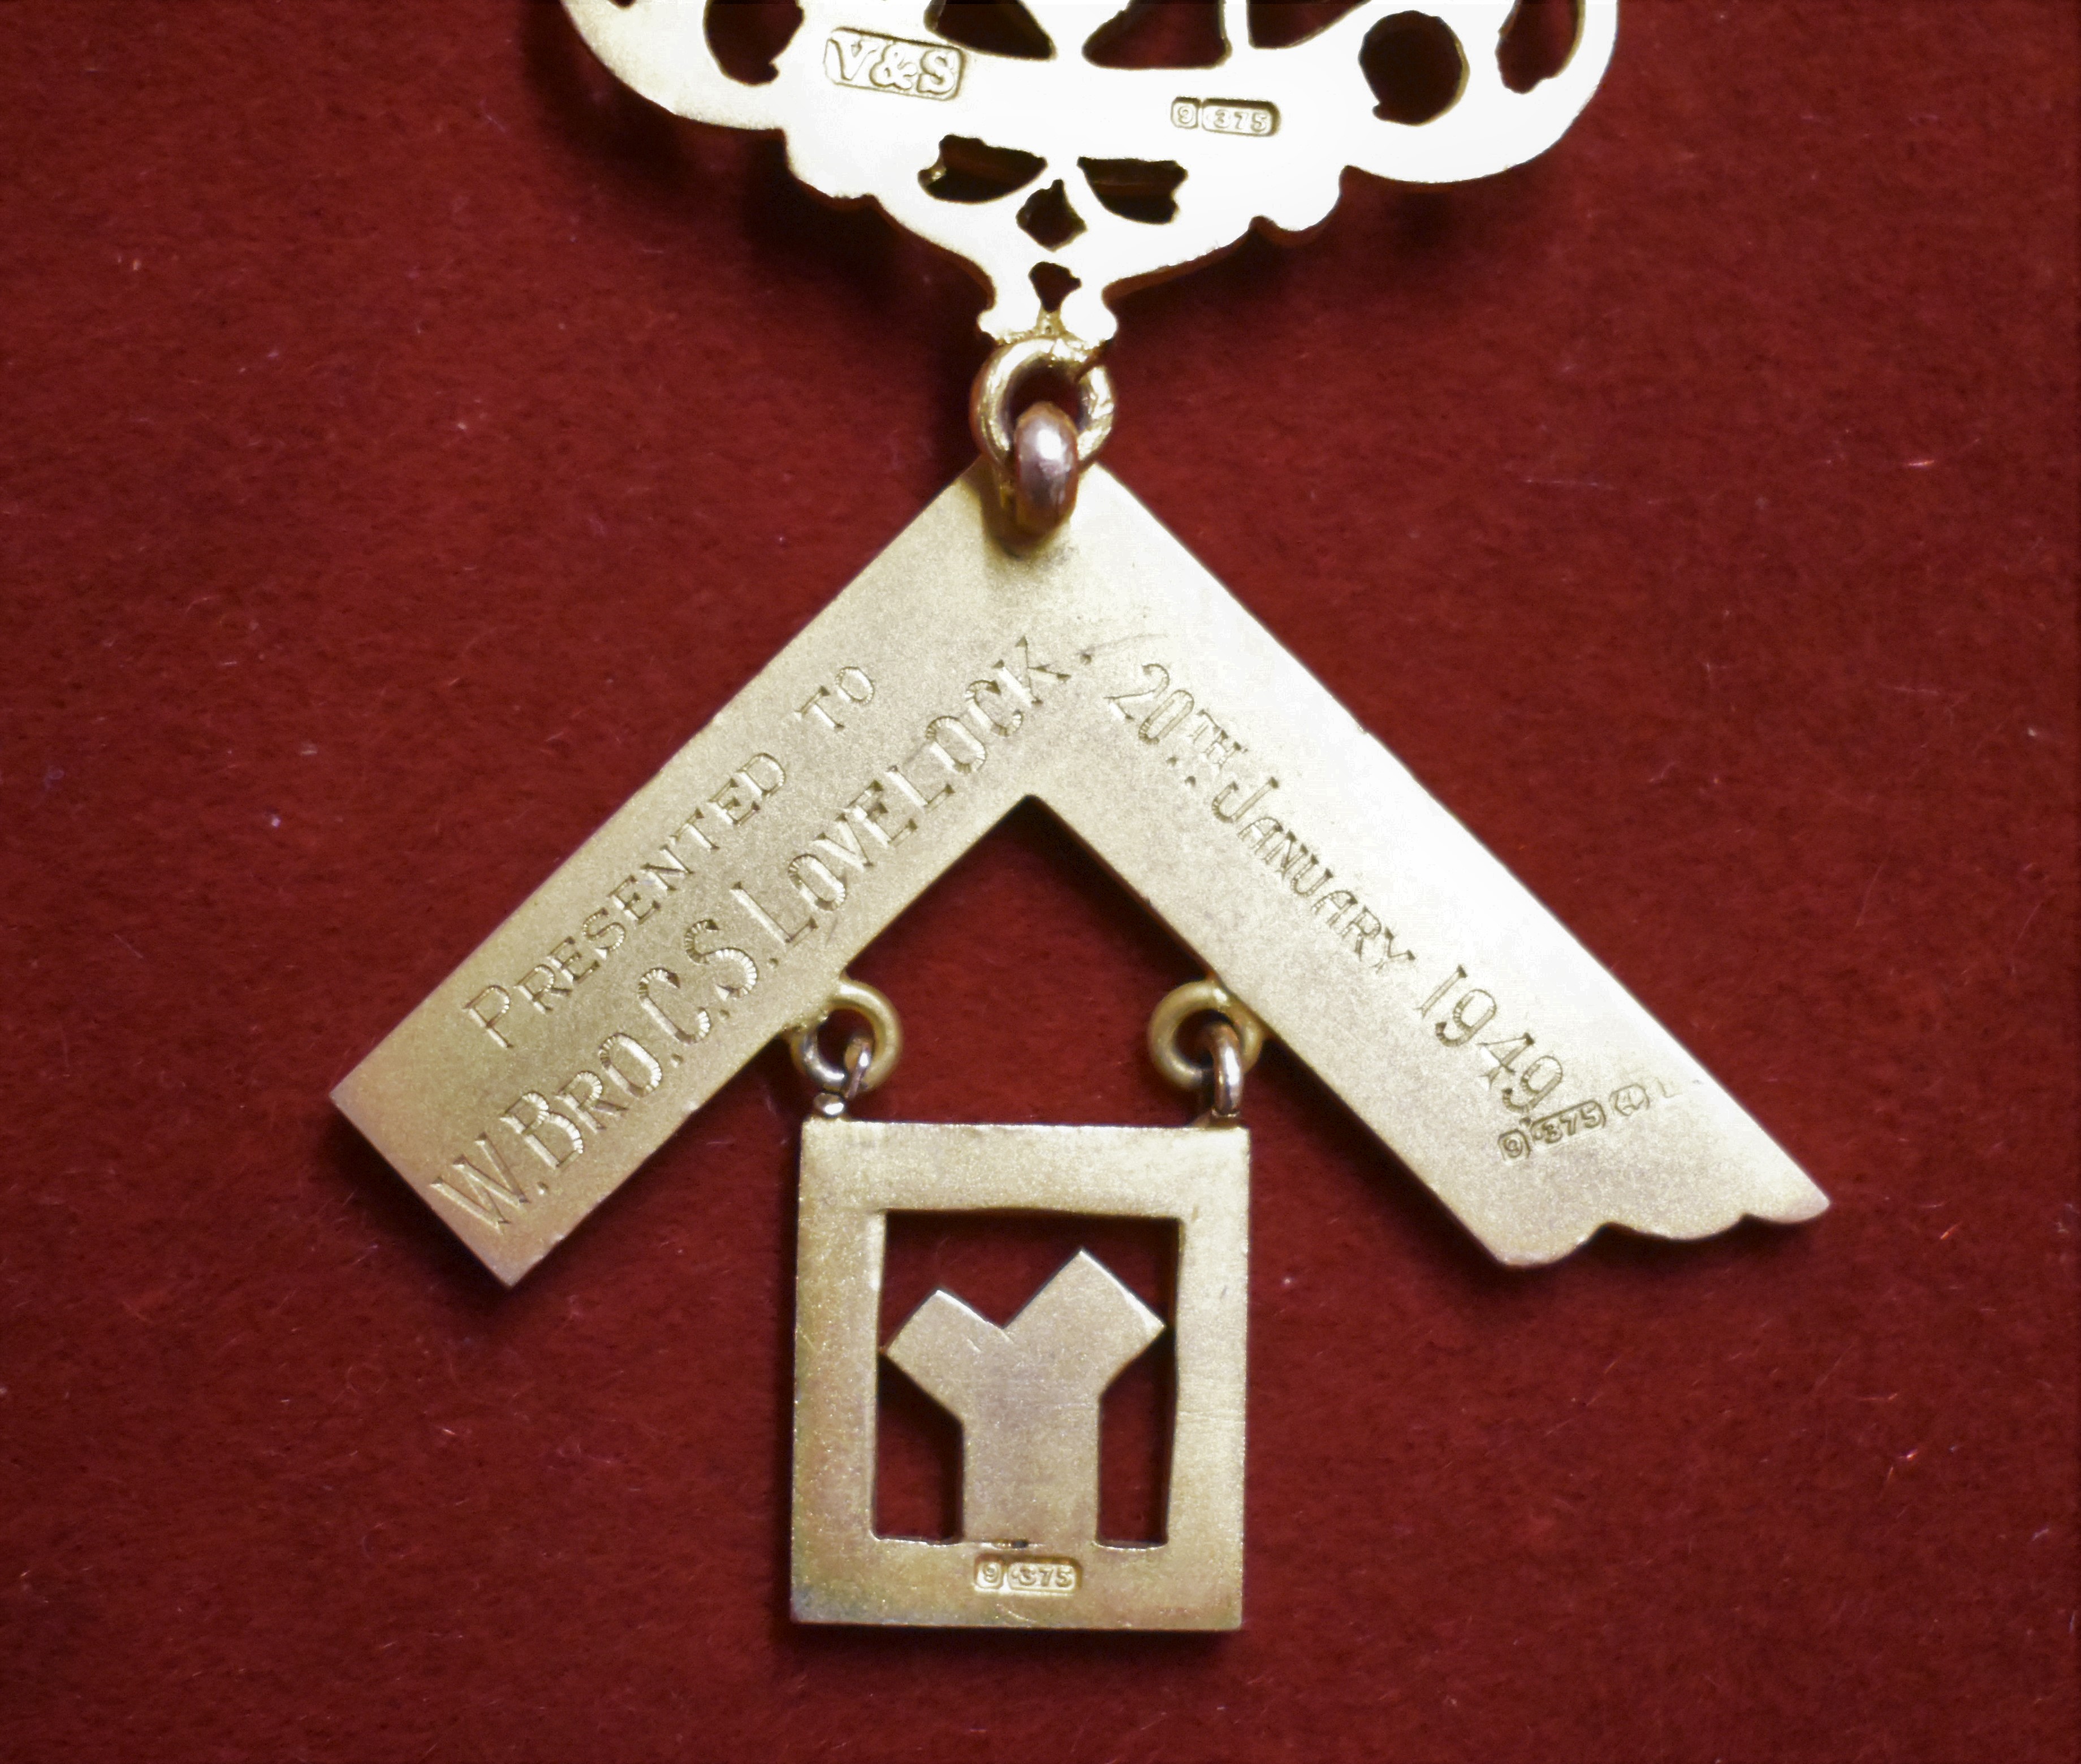 Masonic Past Masters Jewel for a member of the Gunnersbury Lodge No. 3268 in 9ct gold and enamel, - Image 2 of 3